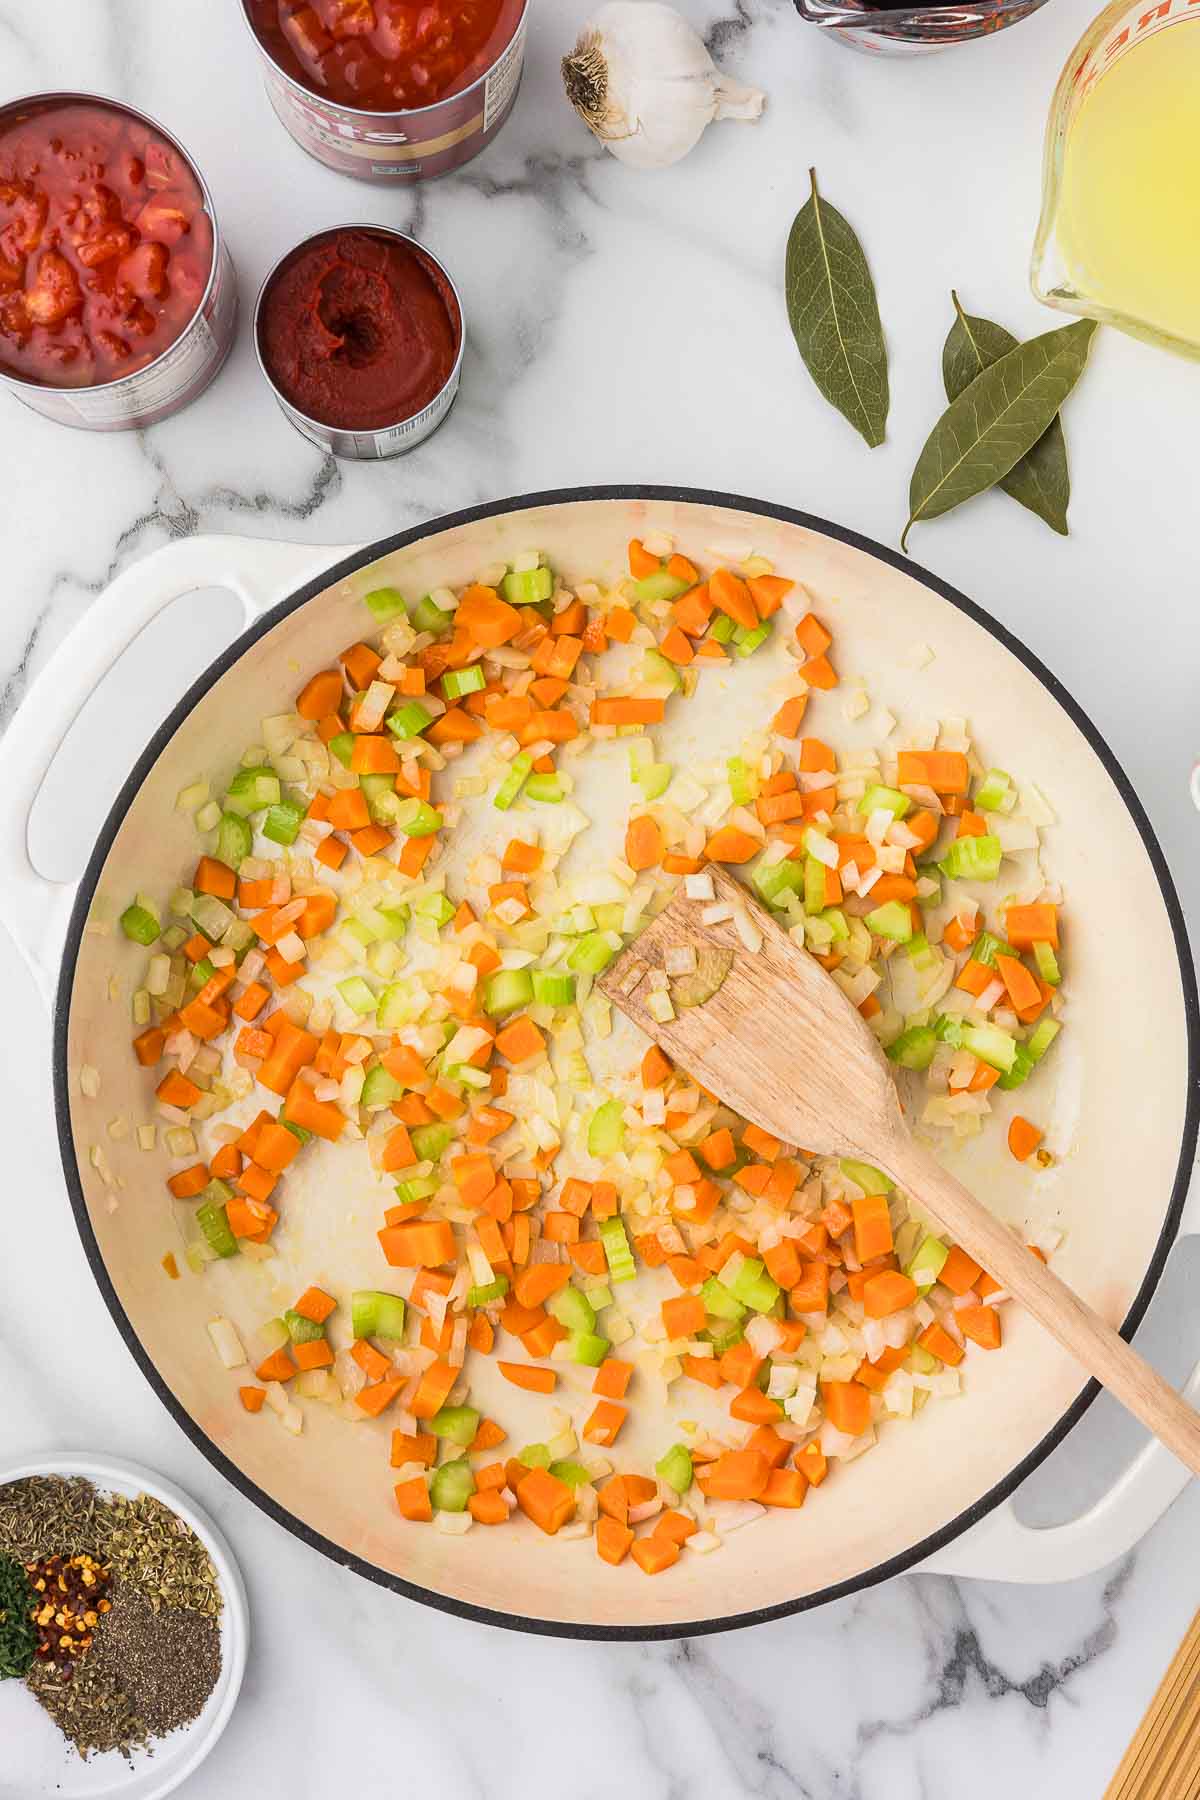 Diced carrots, celery and onion in a pan to saute.